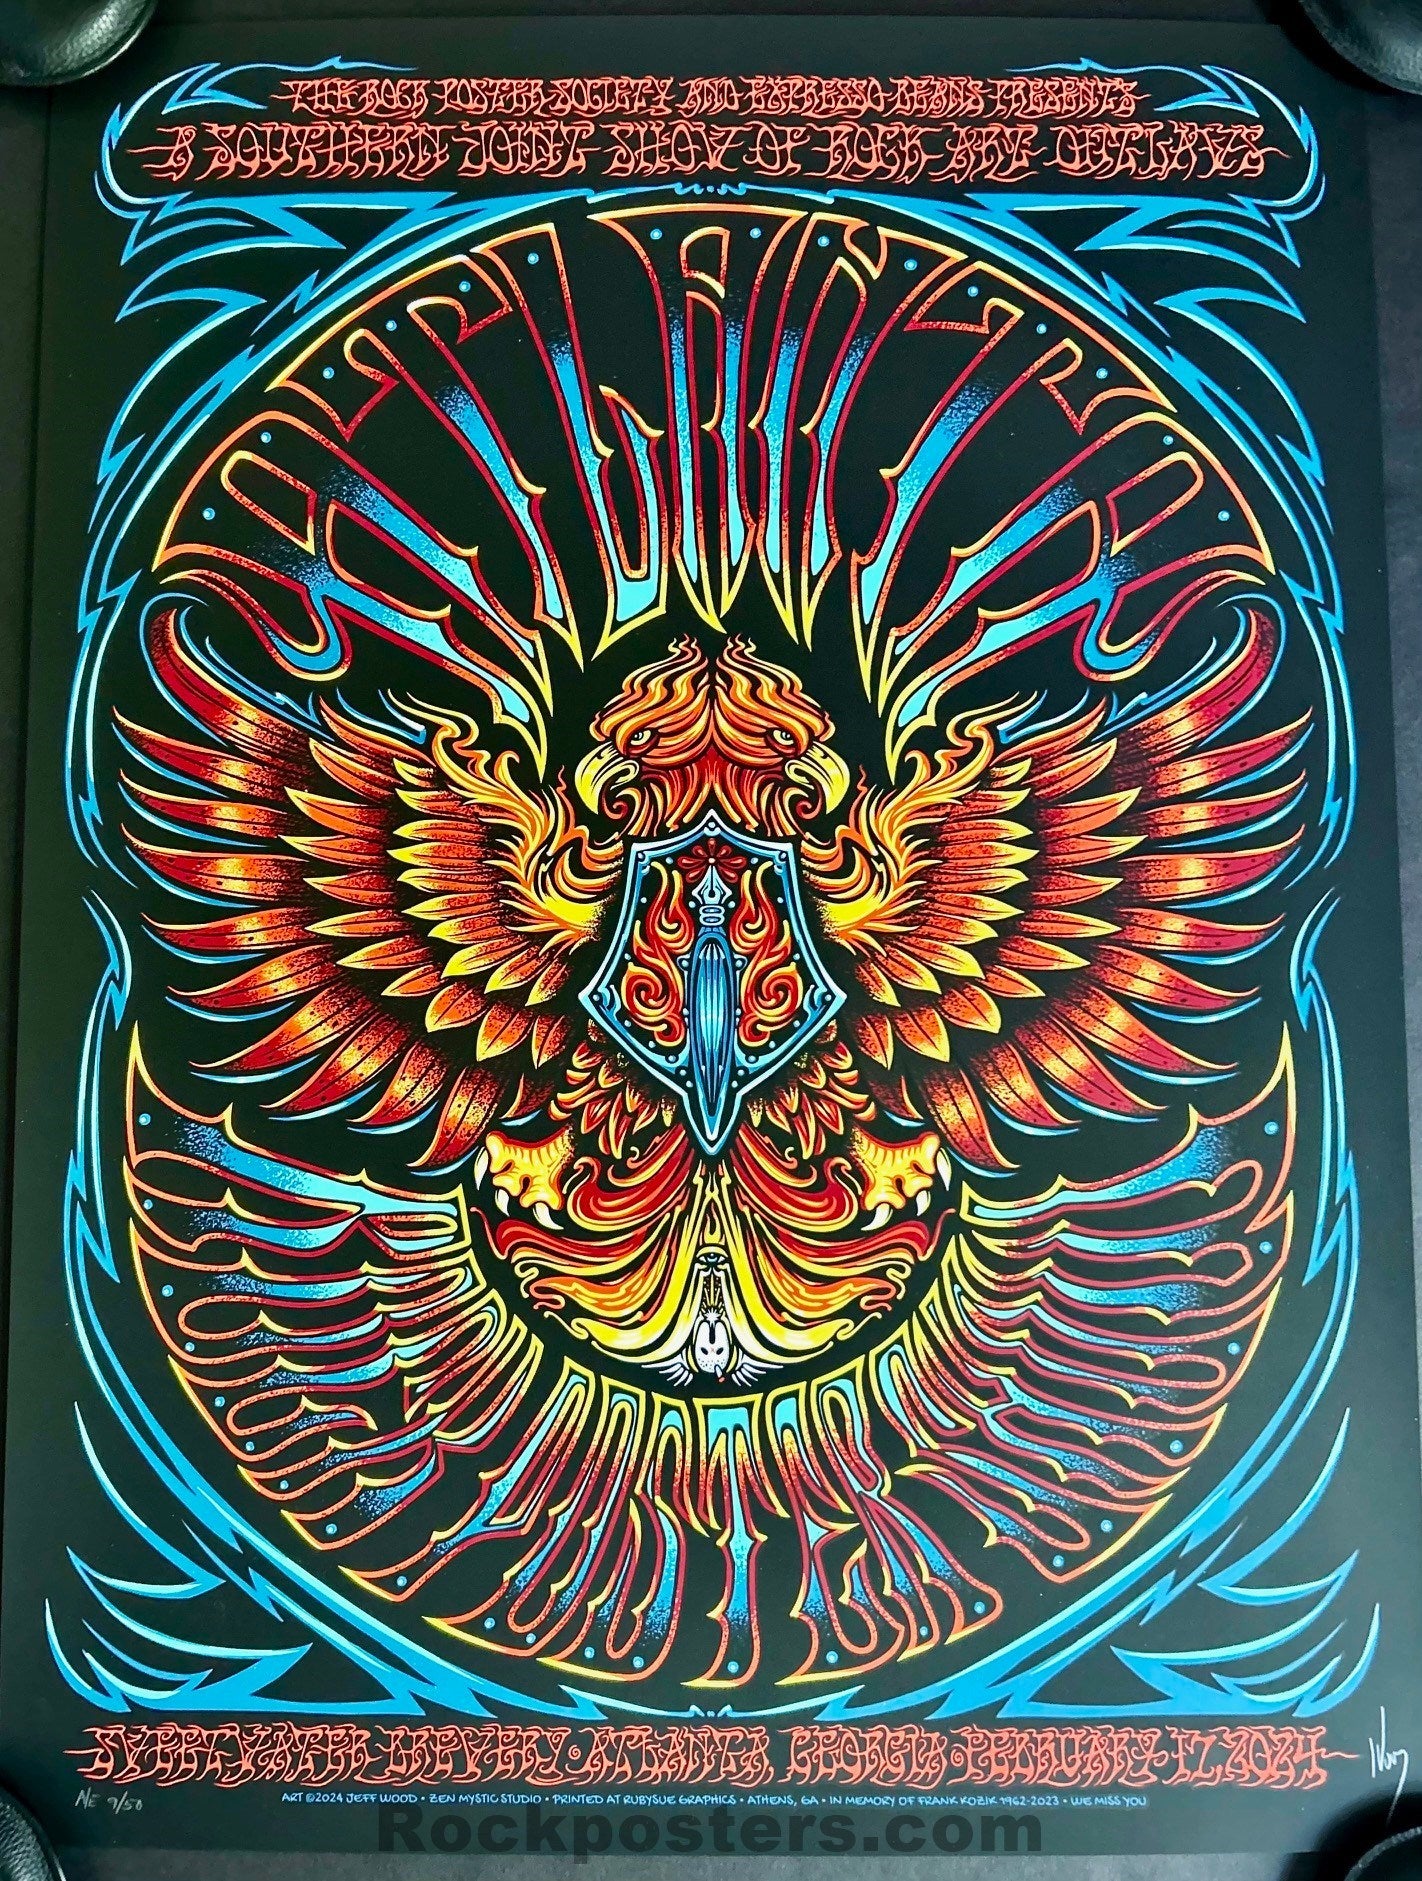 AUCTION - TRPS - The Rock Poster Society - Jeff Wood - Atlanta '24 - Artist Edition Poster - Mint